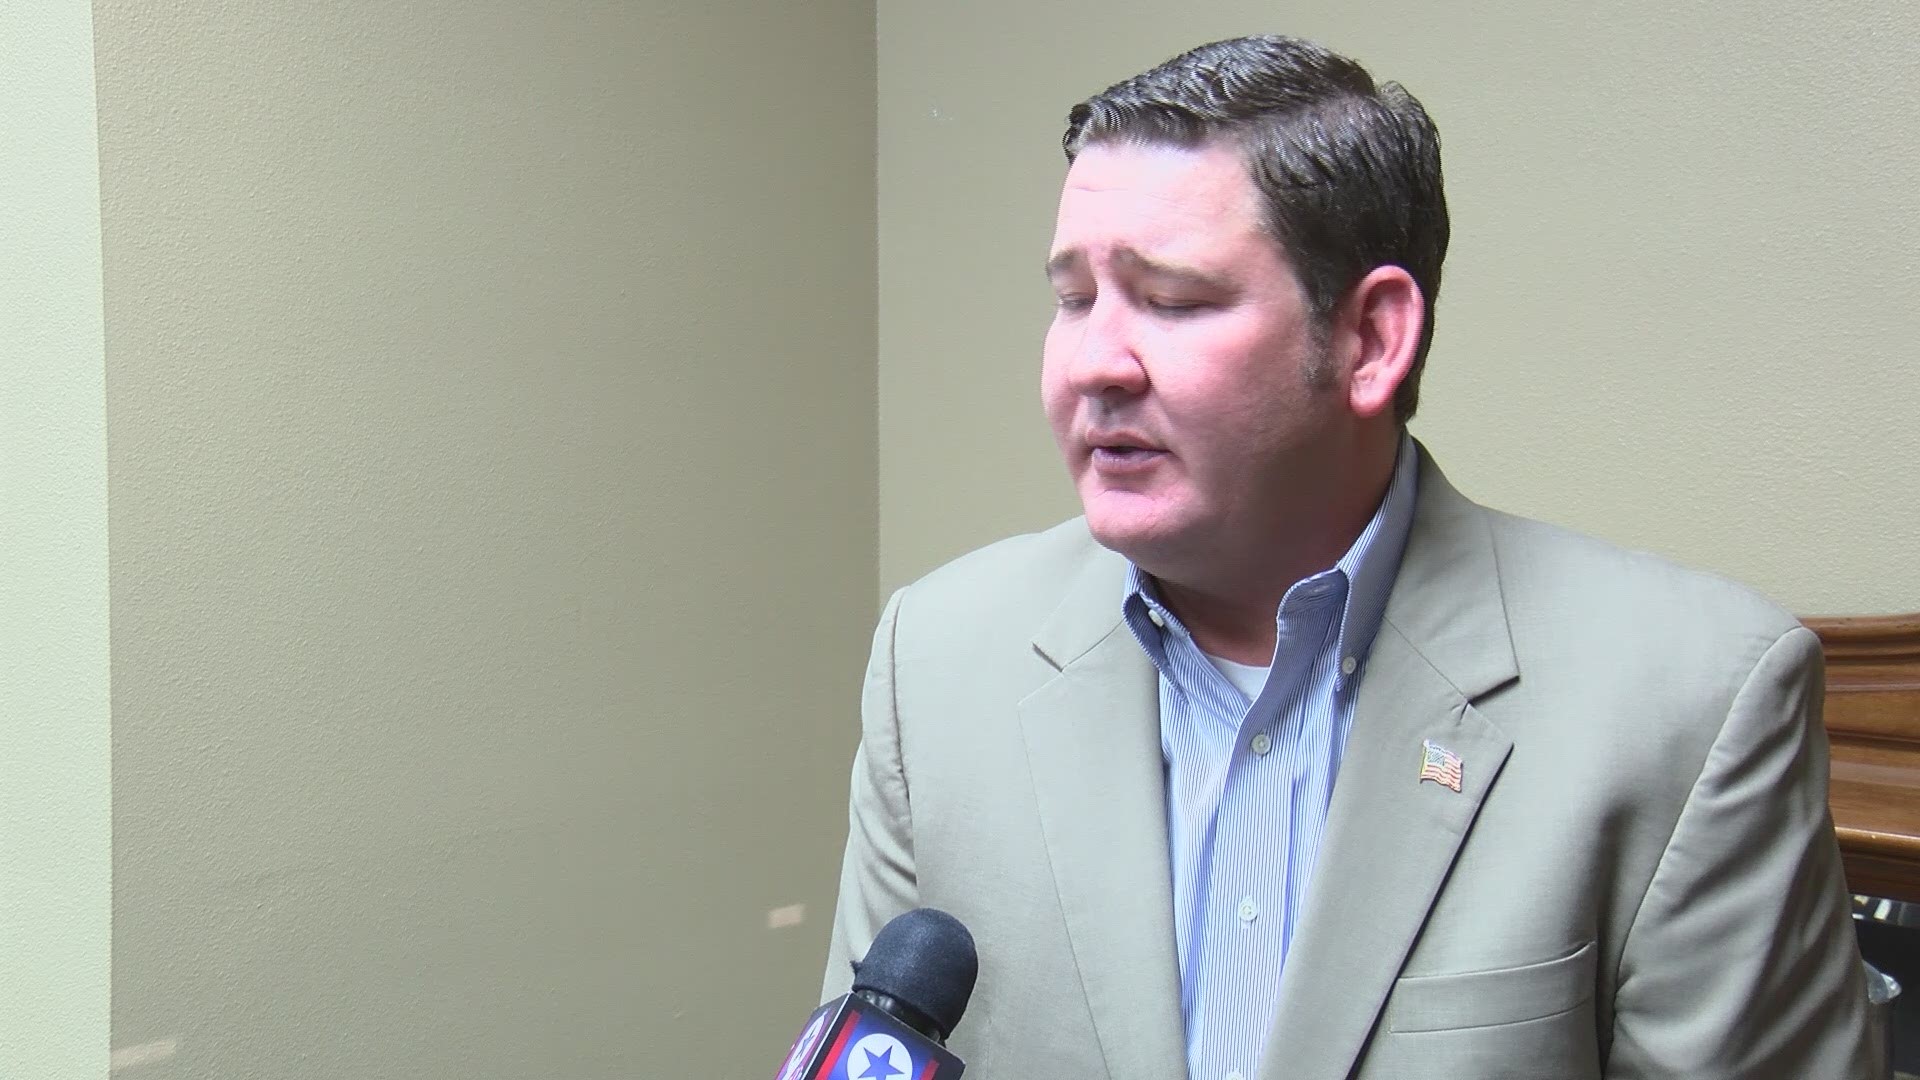 J. Ross Lacy has announced he will be running to represent Texas' 11th Congressional District after Representative Mike Conaway said he would not be running for reelection. The current Midland City Councilman sat down with NewsWest 9 for an interview.